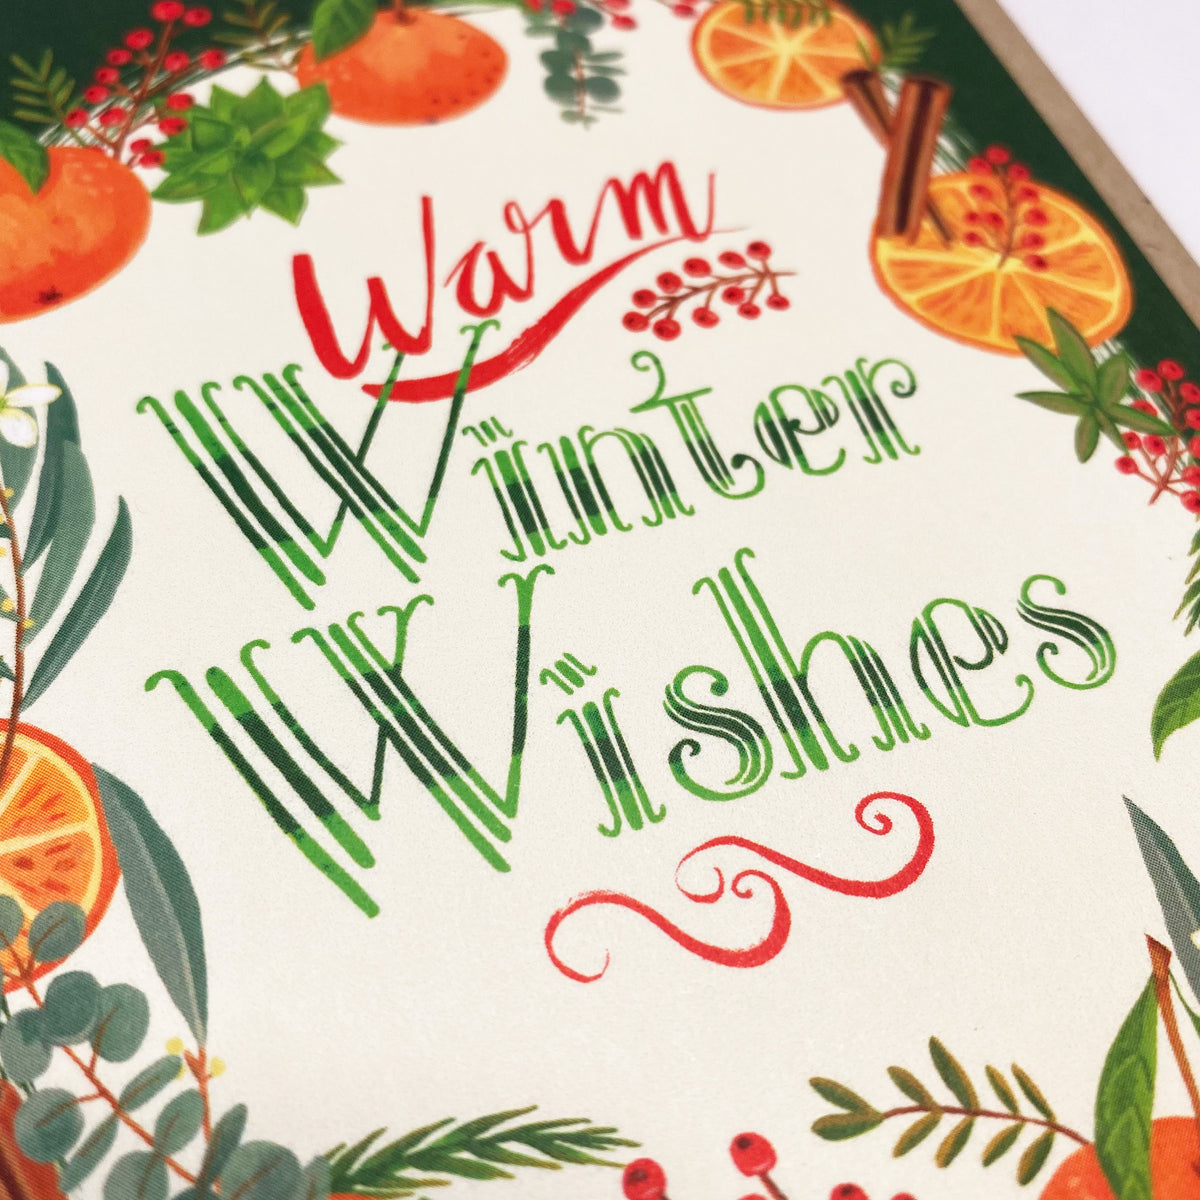 Boxed Set of 8 Cards-Warm Winter Wishes Greeting Cards